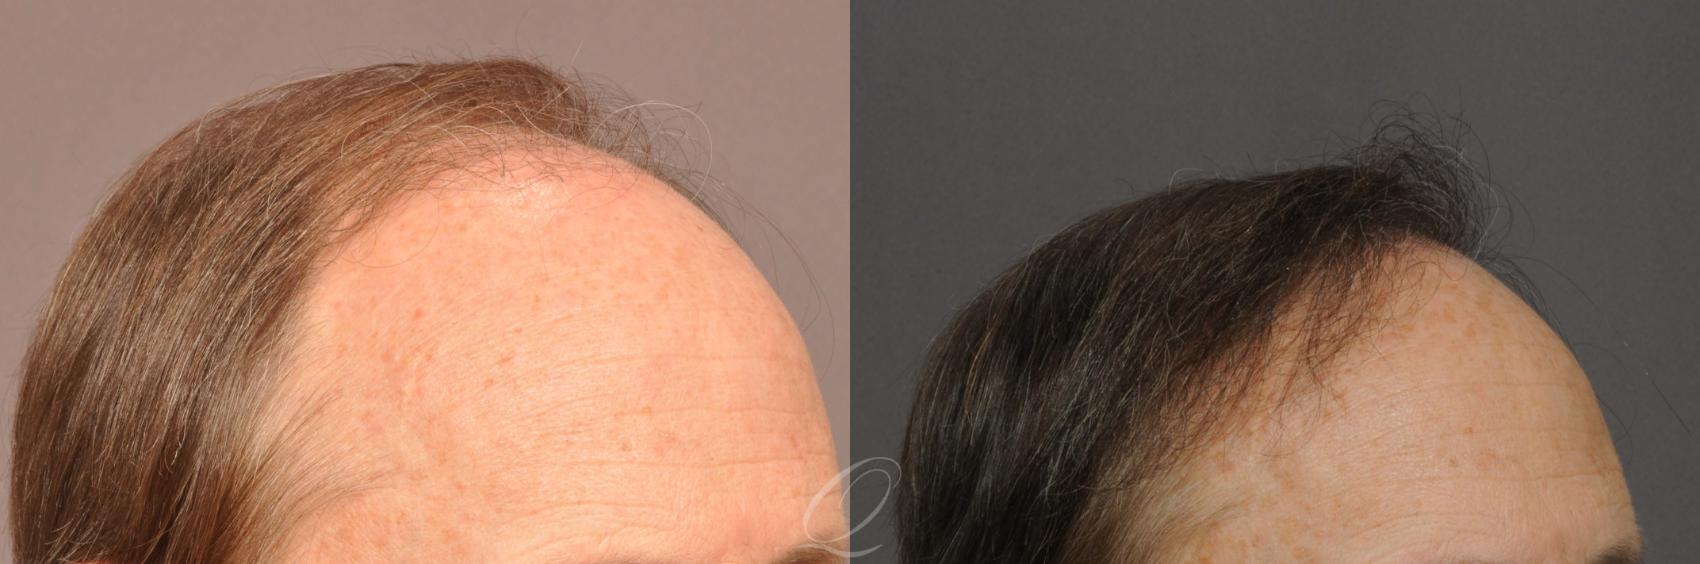 FUT Case 1021 Before & After View #3 | Rochester, Buffalo, & Syracuse, NY | Quatela Center for Hair Restoration